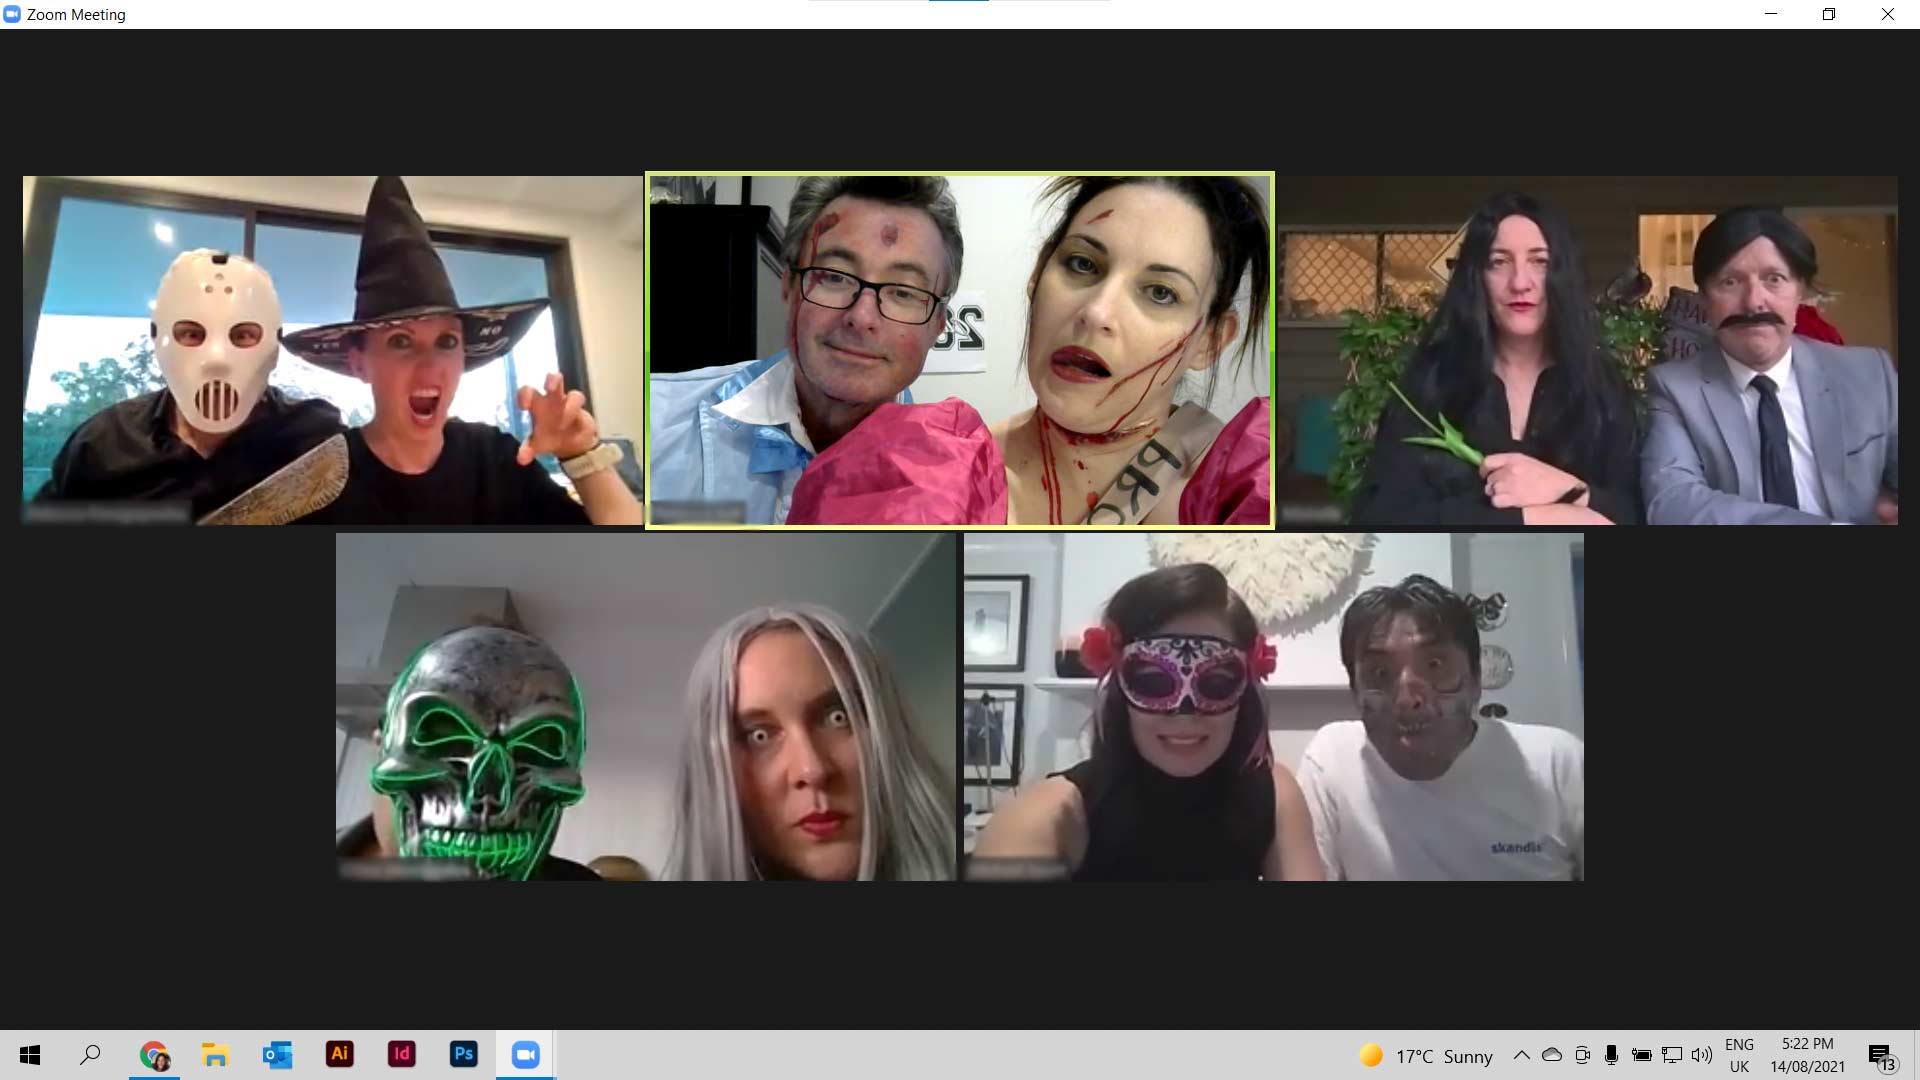 Zoom call with people dressed up in Halloween costumes